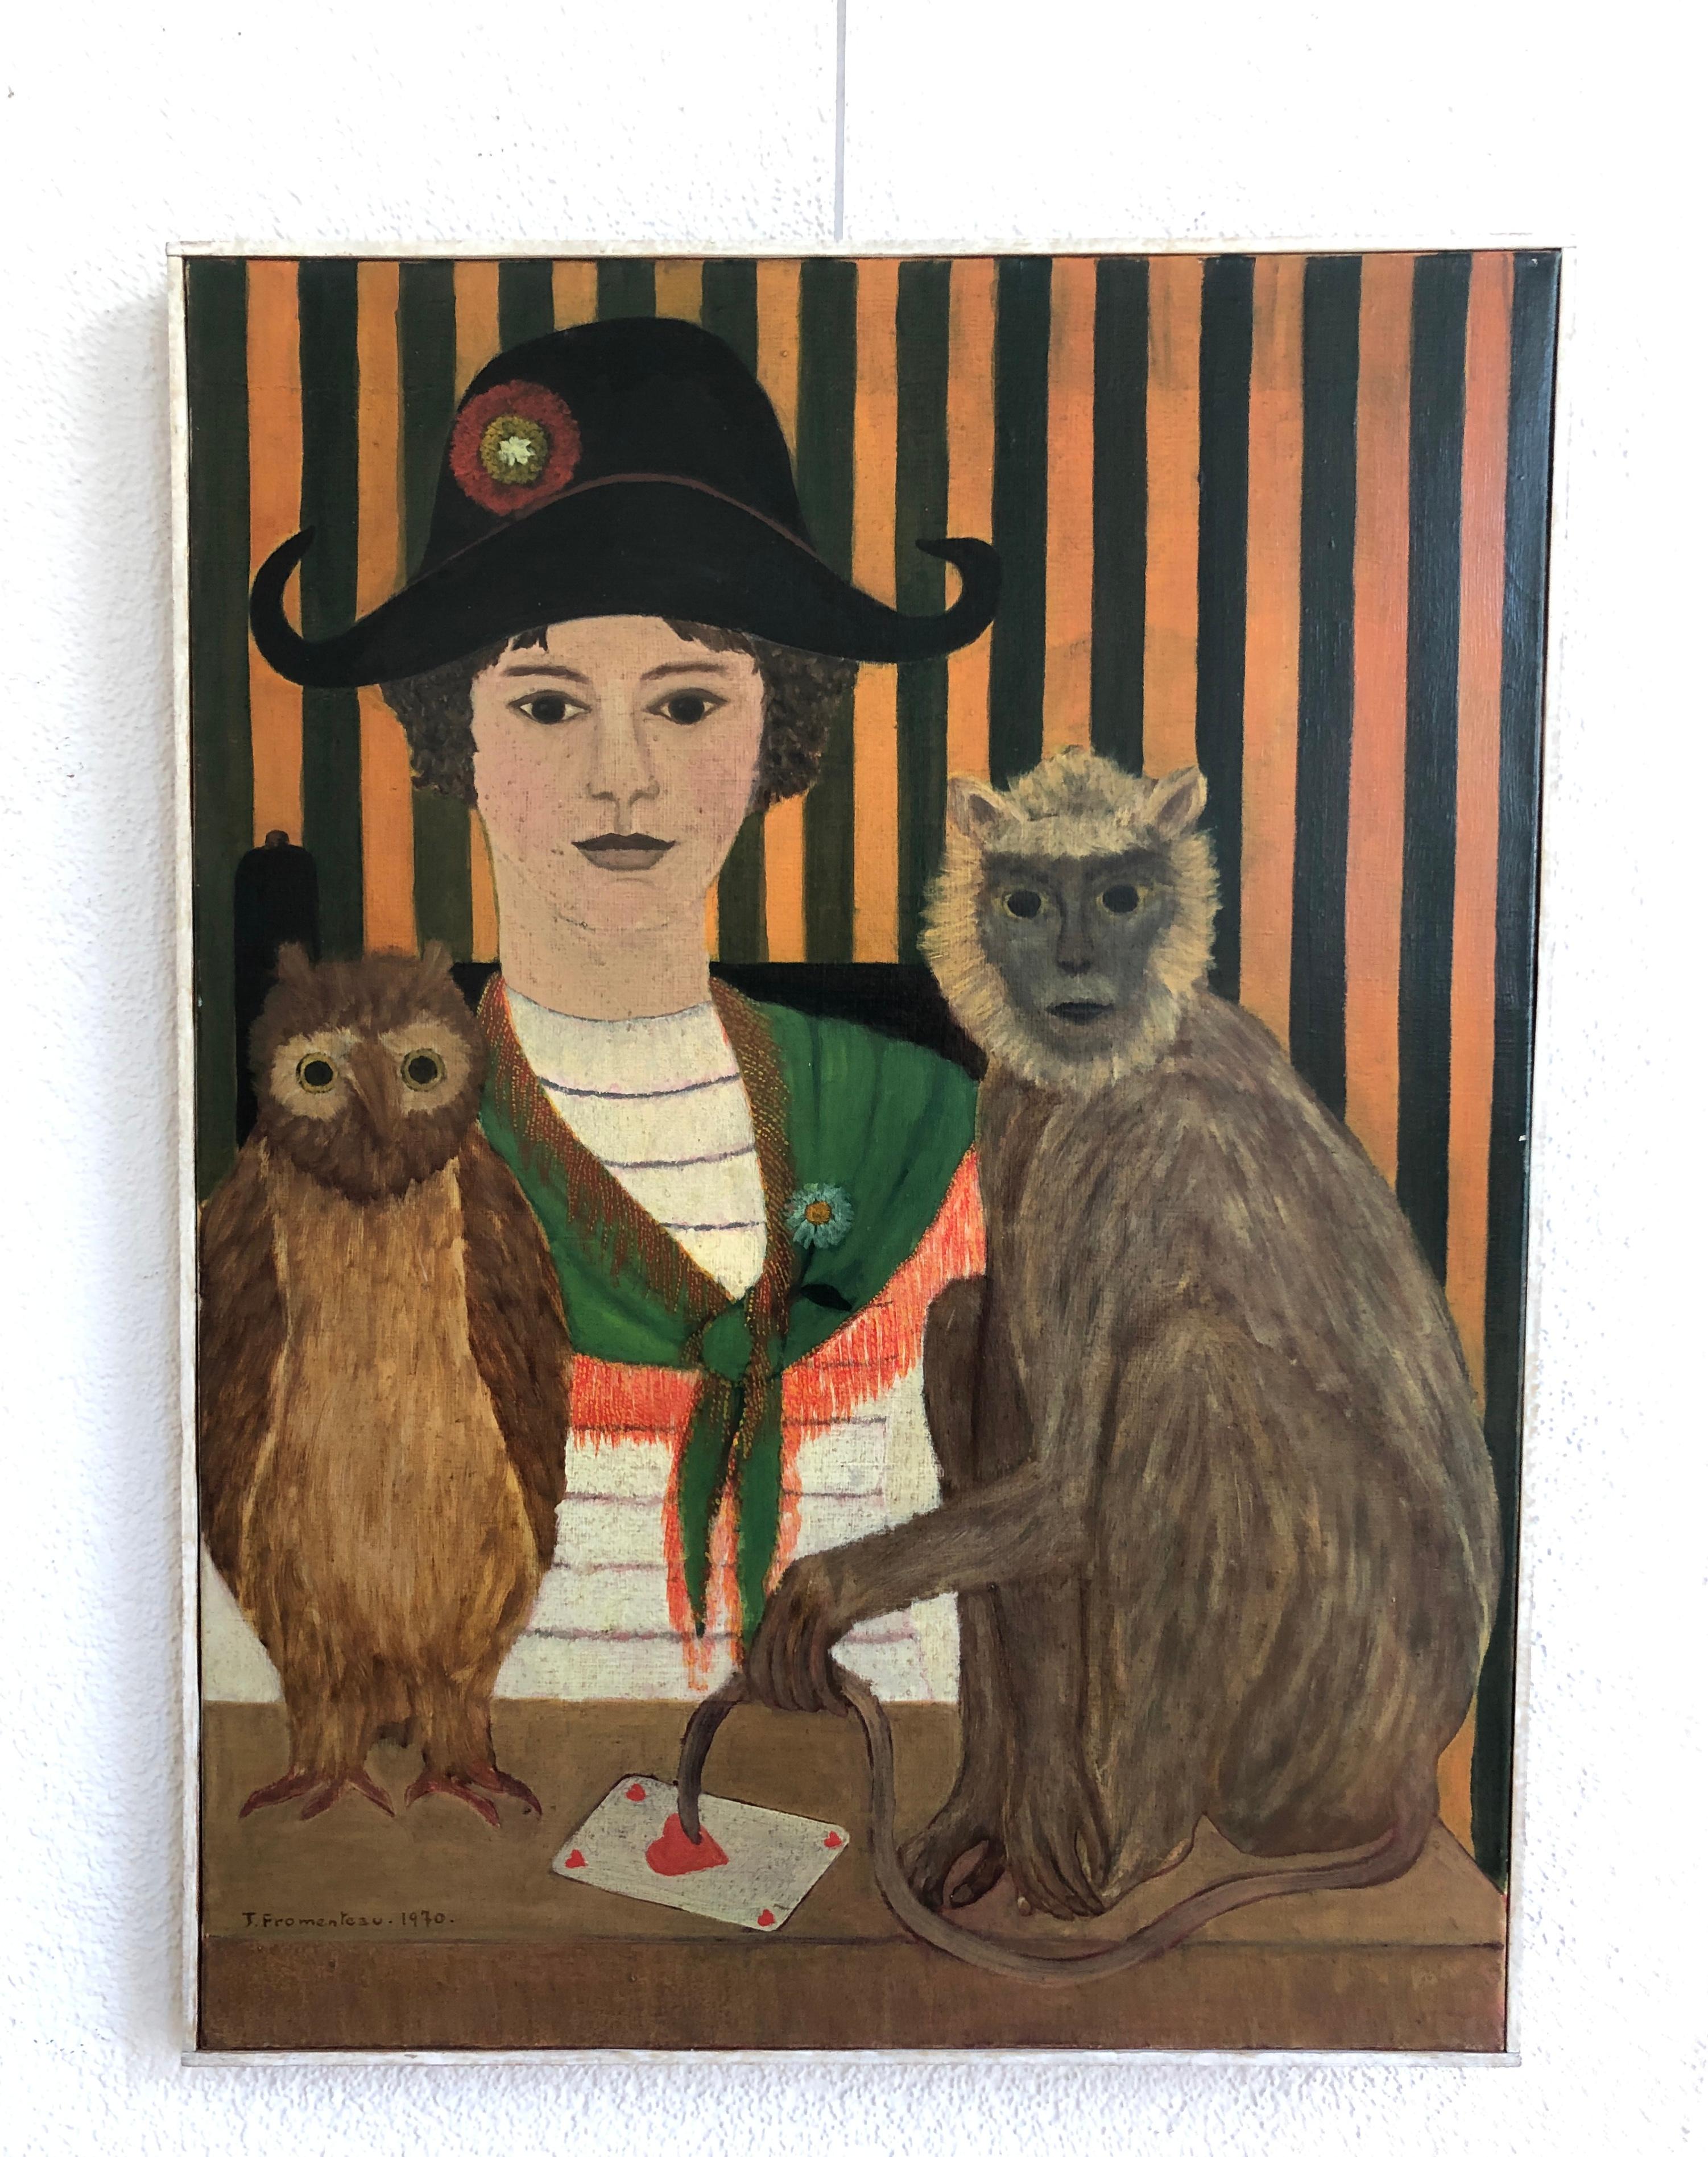 Young girl with cocked hat, monkey, owl, and queen of hearts - Painting by Jacqueline Fromenteau